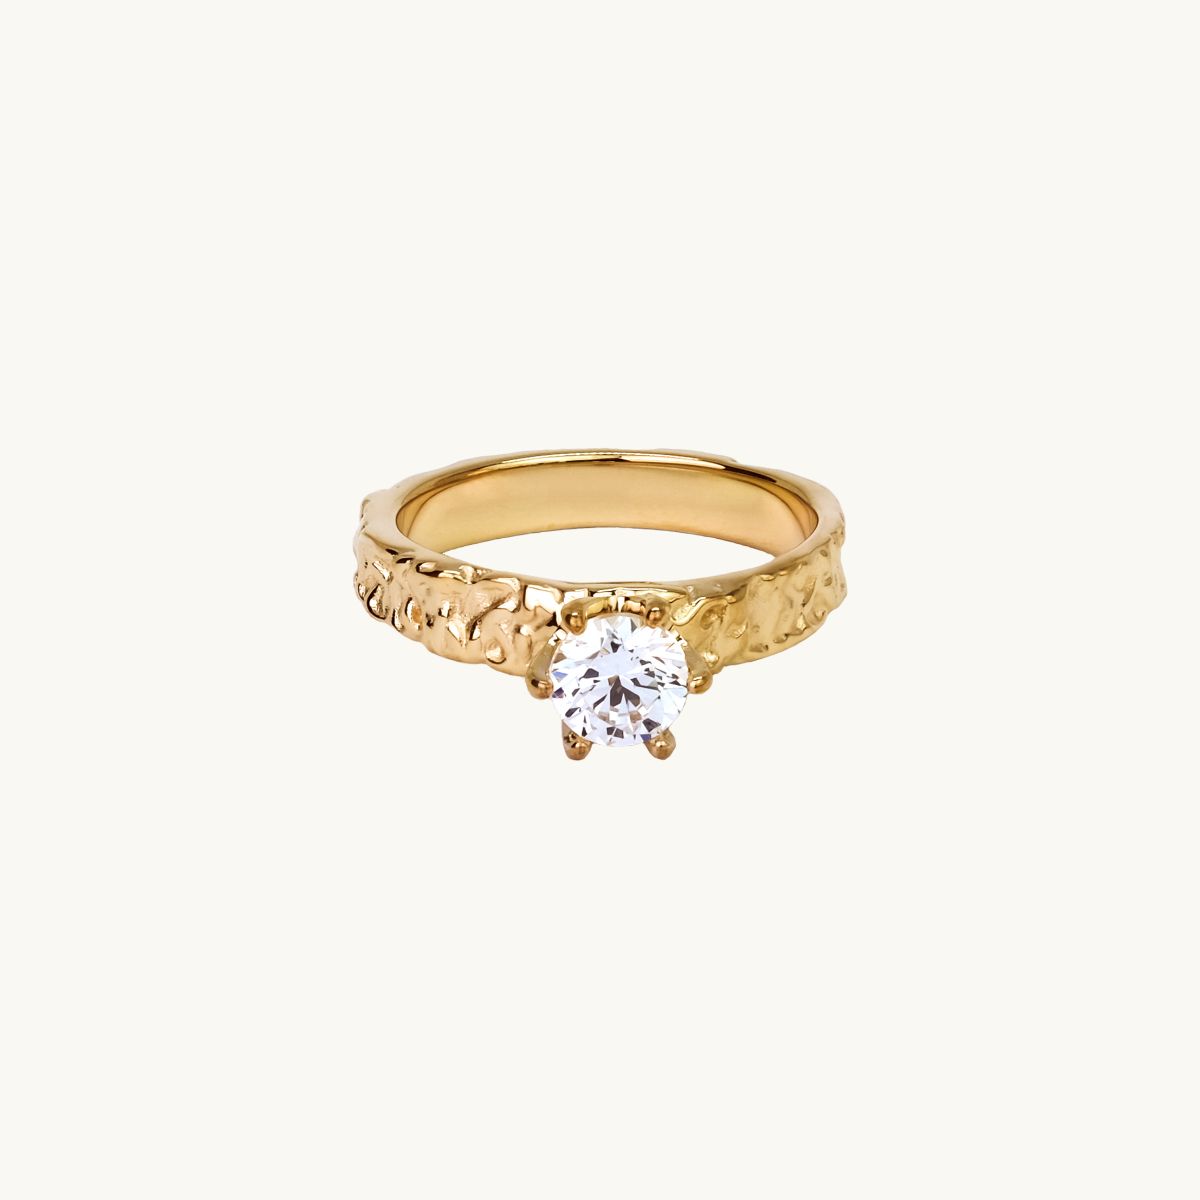 Small Princess ring in gold plated brass with white stone